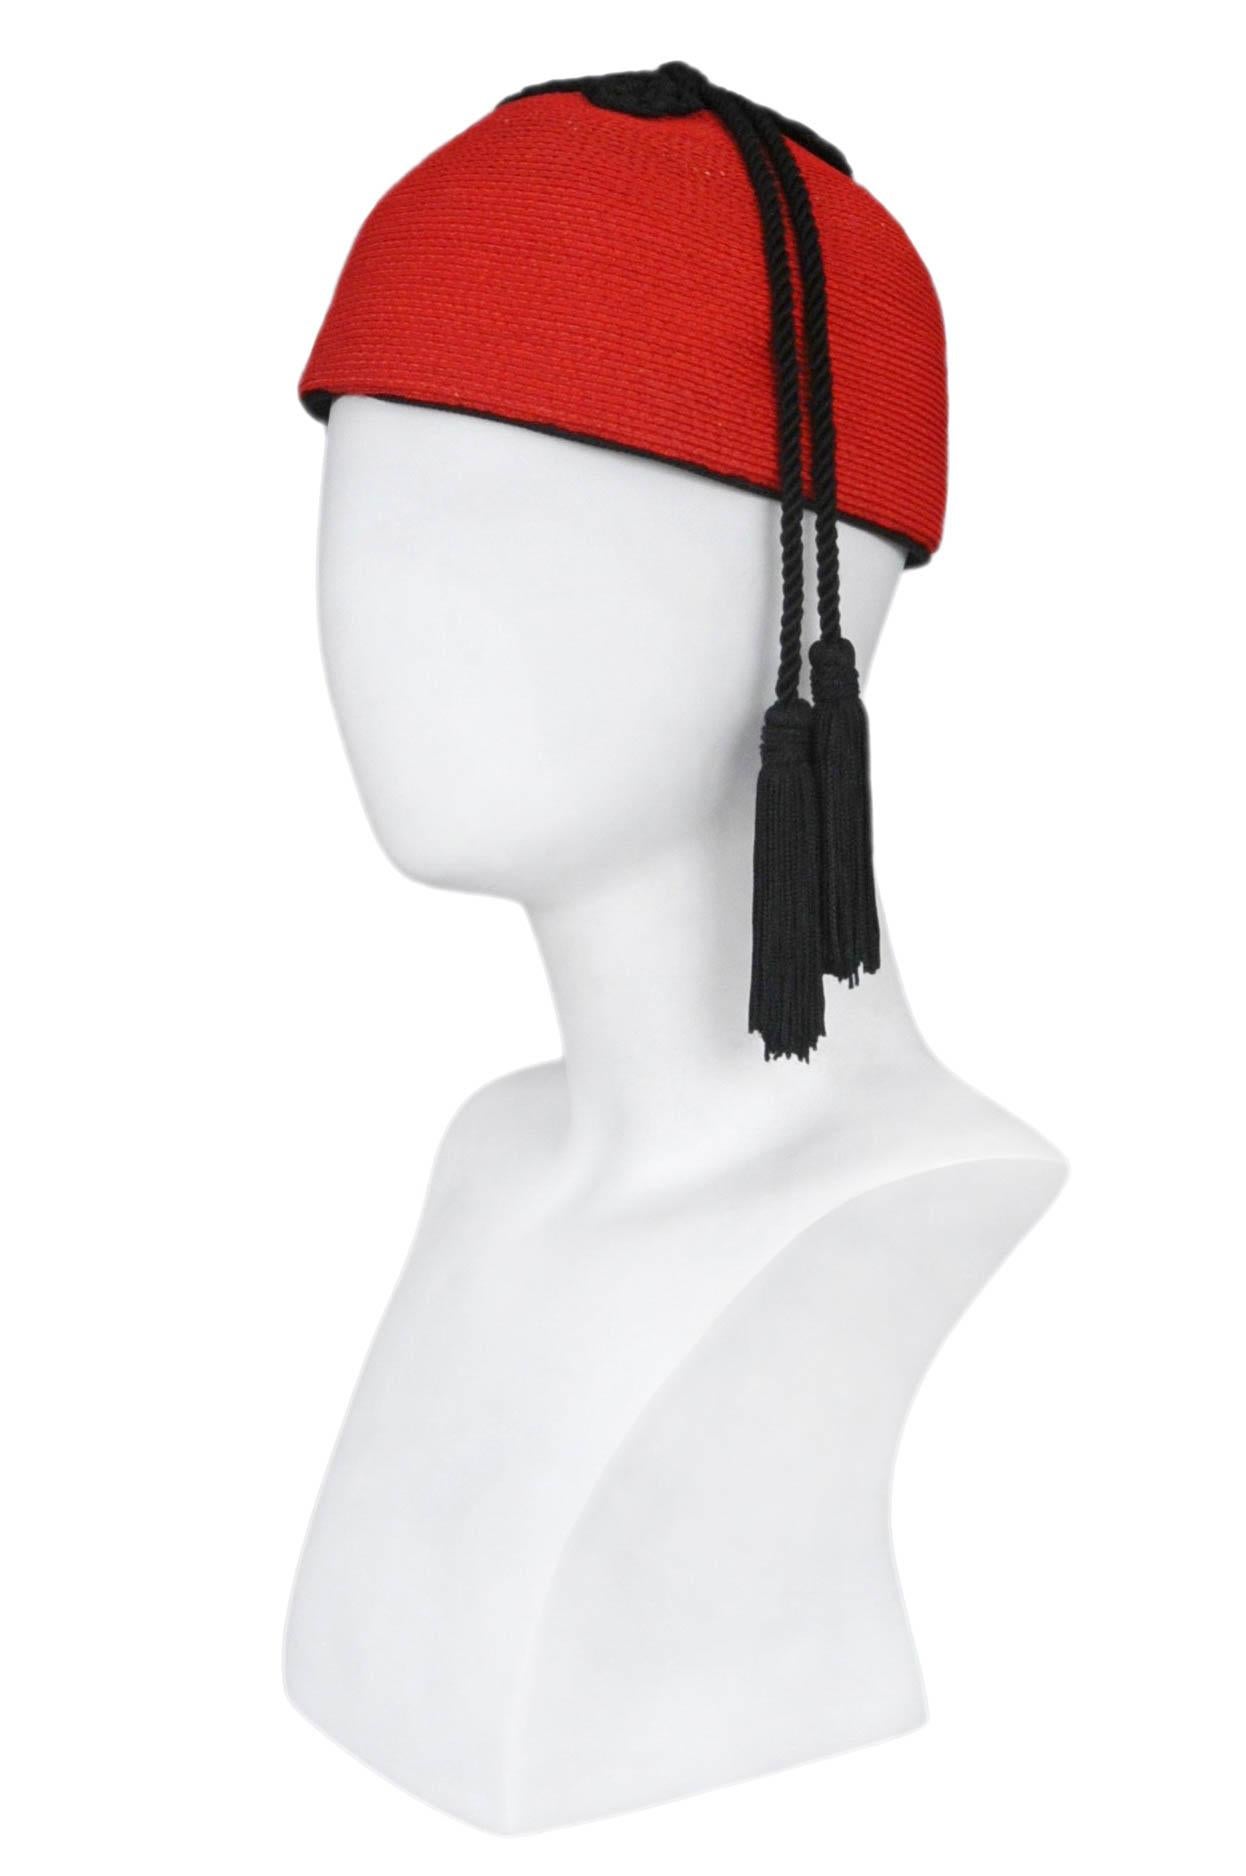 hat with a tassel